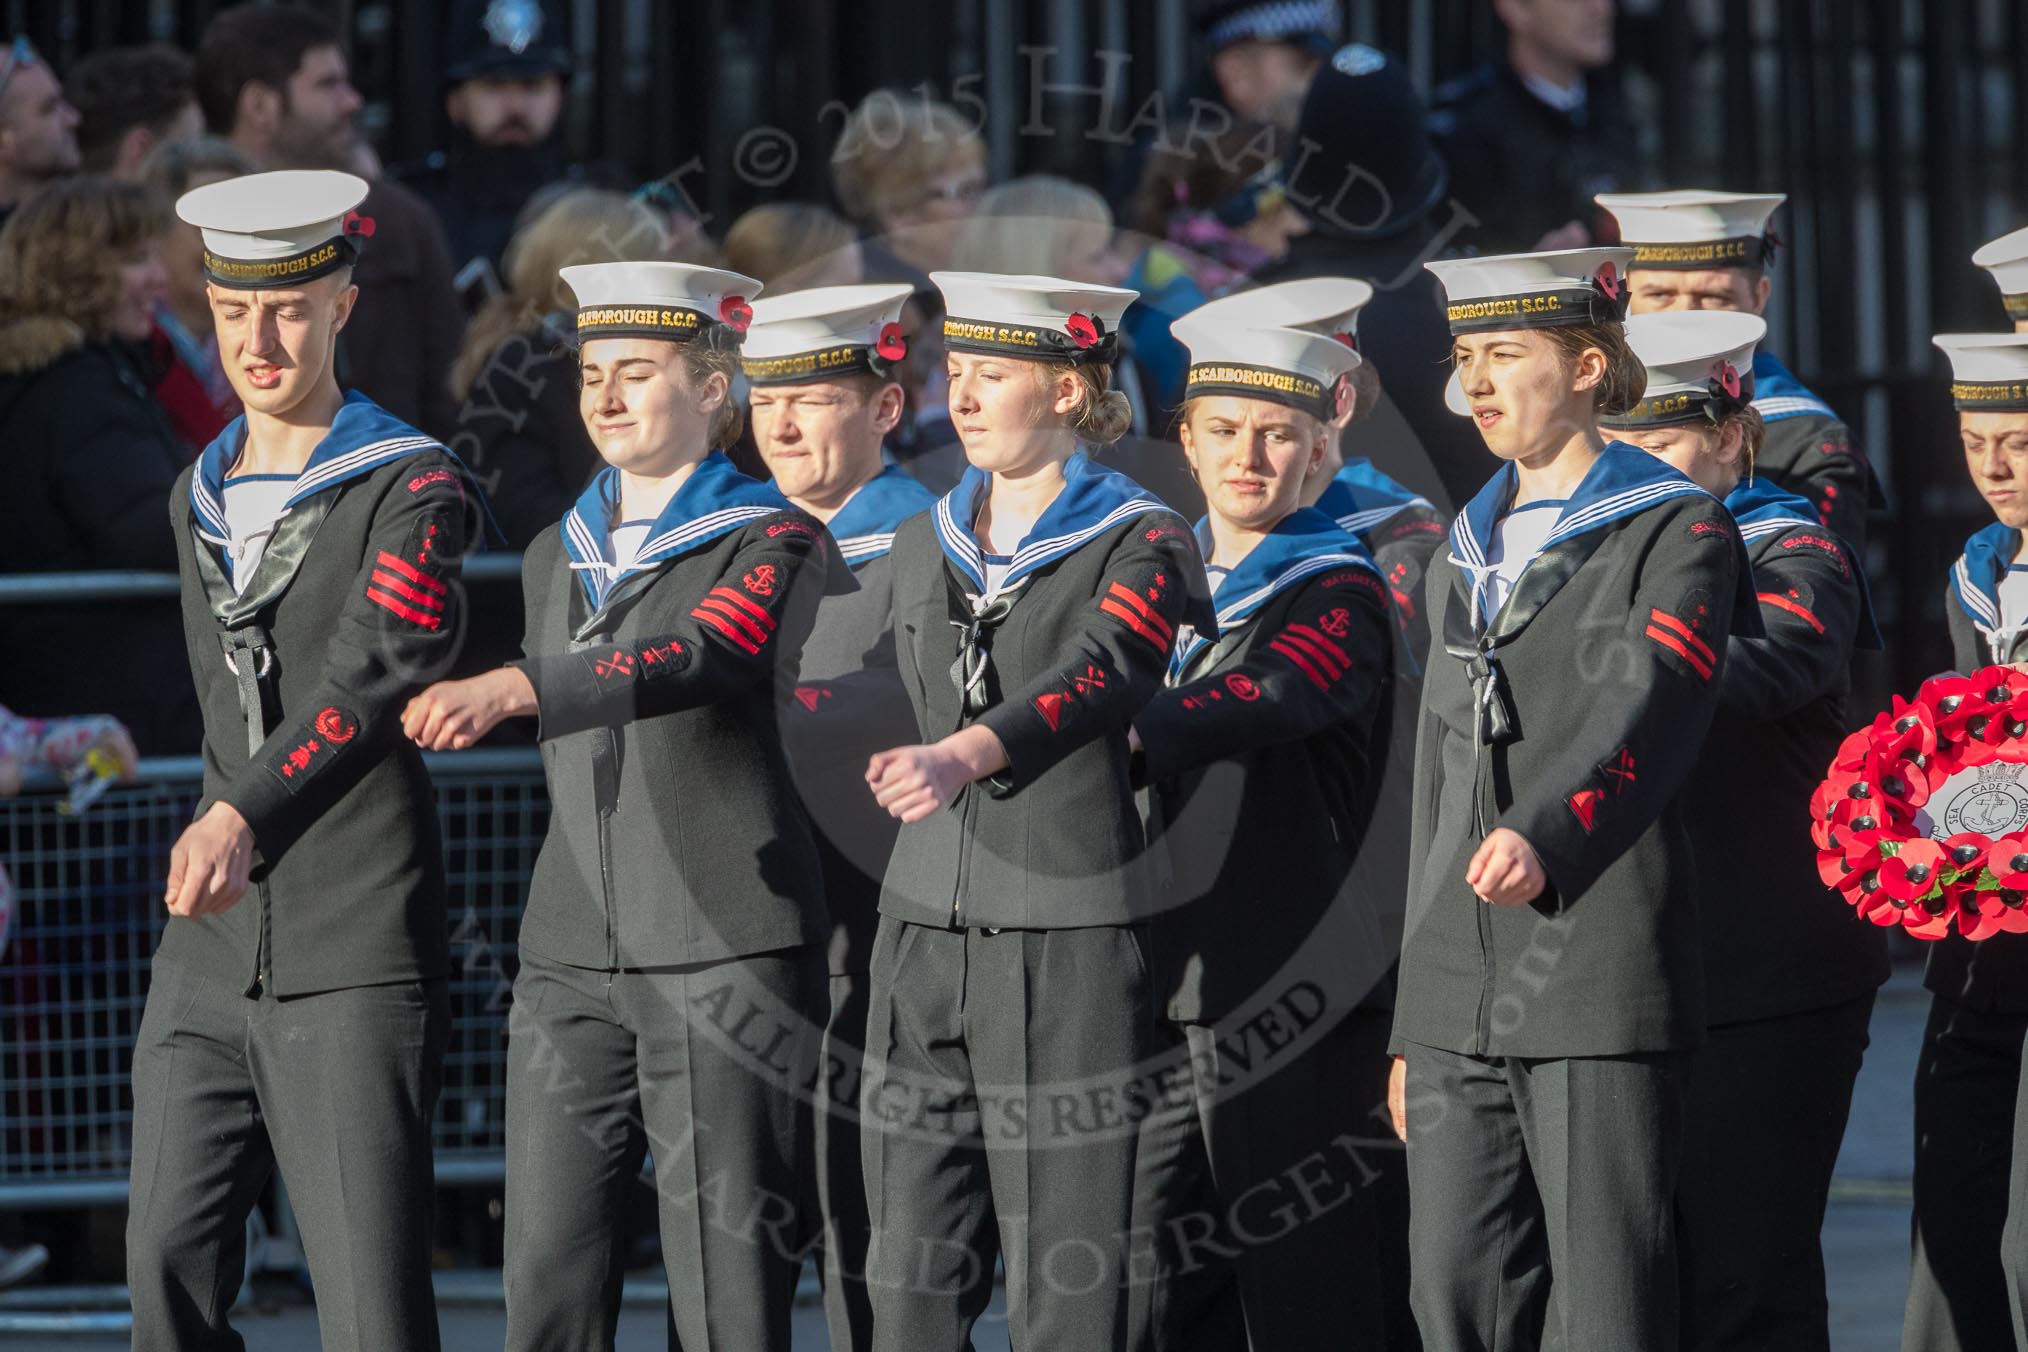 March Past, Remembrance Sunday at the Cenotaph 2016: M32 Army and combined Cadet Force.
Cenotaph, Whitehall, London SW1,
London,
Greater London,
United Kingdom,
on 13 November 2016 at 13:17, image #2786